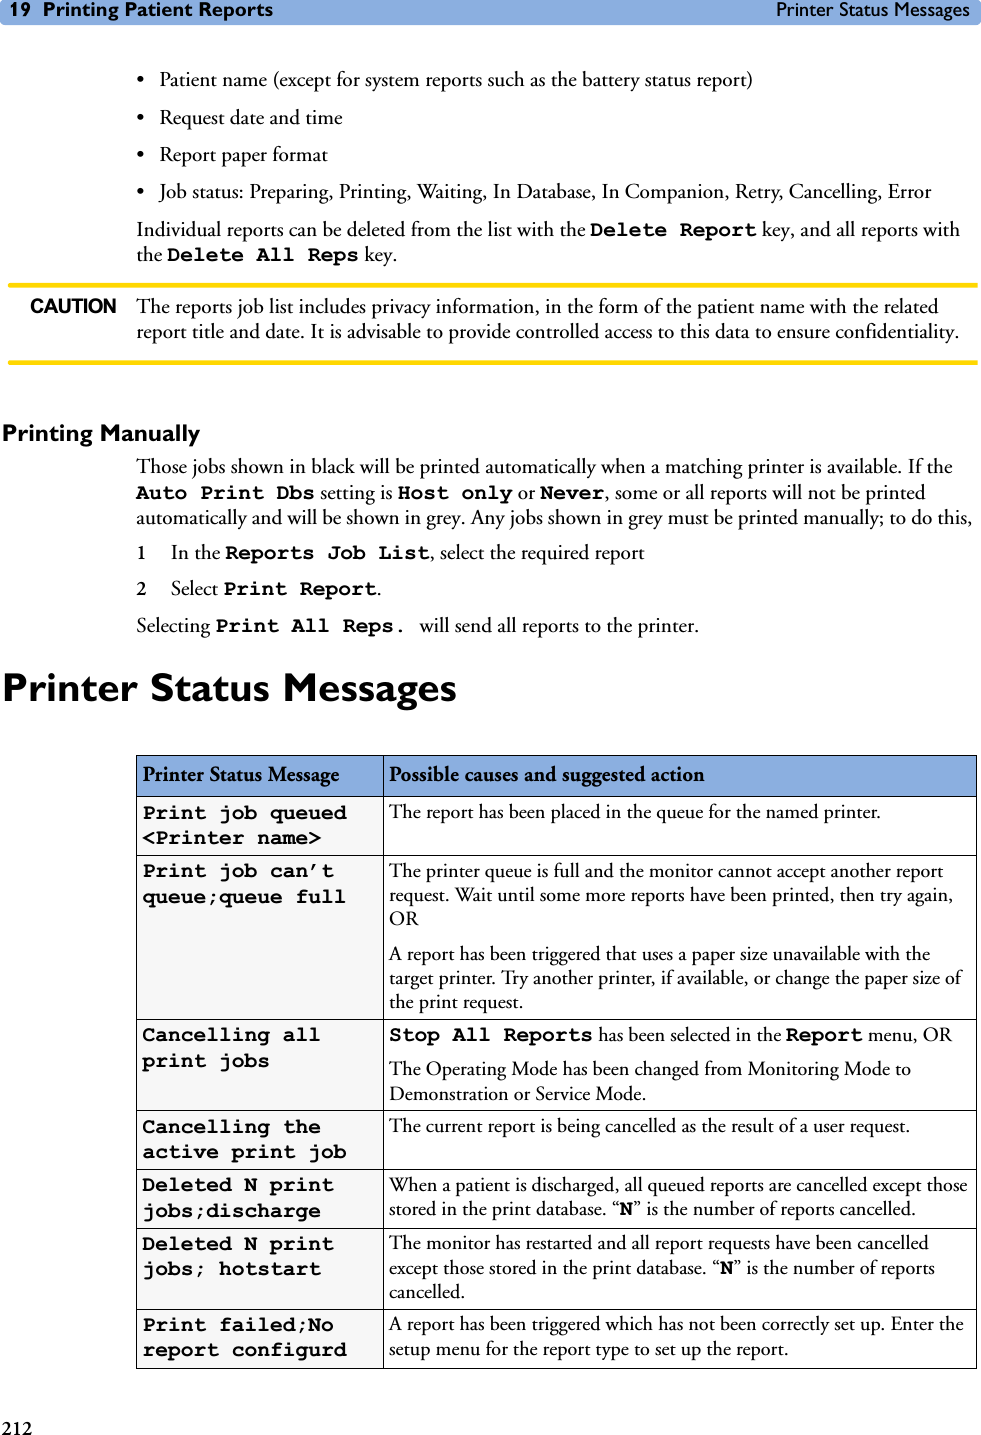 19 Printing Patient Reports Printer Status Messages212• Patient name (except for system reports such as the battery status report)• Request date and time• Report paper format• Job status: Preparing, Printing, Waiting, In Database, In Companion, Retry, Cancelling, ErrorIndividual reports can be deleted from the list with the Delete Report key, and all reports with the Delete All Reps key. CAUTION The reports job list includes privacy information, in the form of the patient name with the related report title and date. It is advisable to provide controlled access to this data to ensure confidentiality. Printing ManuallyThose jobs shown in black will be printed automatically when a matching printer is available. If the Auto Print Dbs setting is Host only or Never, some or all reports will not be printed automatically and will be shown in grey. Any jobs shown in grey must be printed manually; to do this, 1In the Reports Job List, select the required report2Select Print Report.Selecting Print All Reps. will send all reports to the printer. Printer Status MessagesPrinter Status Message Possible causes and suggested actionPrint job queued &lt;Printer name&gt;The report has been placed in the queue for the named printer. Print job can’t queue;queue fullThe printer queue is full and the monitor cannot accept another report request. Wait until some more reports have been printed, then try again, OR A report has been triggered that uses a paper size unavailable with the target printer. Try another printer, if available, or change the paper size of the print request.Cancelling all print jobsStop All Reports has been selected in the Report menu, ORThe Operating Mode has been changed from Monitoring Mode to Demonstration or Service Mode.Cancelling the active print jobThe current report is being cancelled as the result of a user request.Deleted N print jobs;dischargeWhen a patient is discharged, all queued reports are cancelled except those stored in the print database. “N” is the number of reports cancelled.Deleted N print jobs; hotstartThe monitor has restarted and all report requests have been cancelled except those stored in the print database. “N” is the number of reports cancelled. Print failed;No report configurdA report has been triggered which has not been correctly set up. Enter the setup menu for the report type to set up the report.